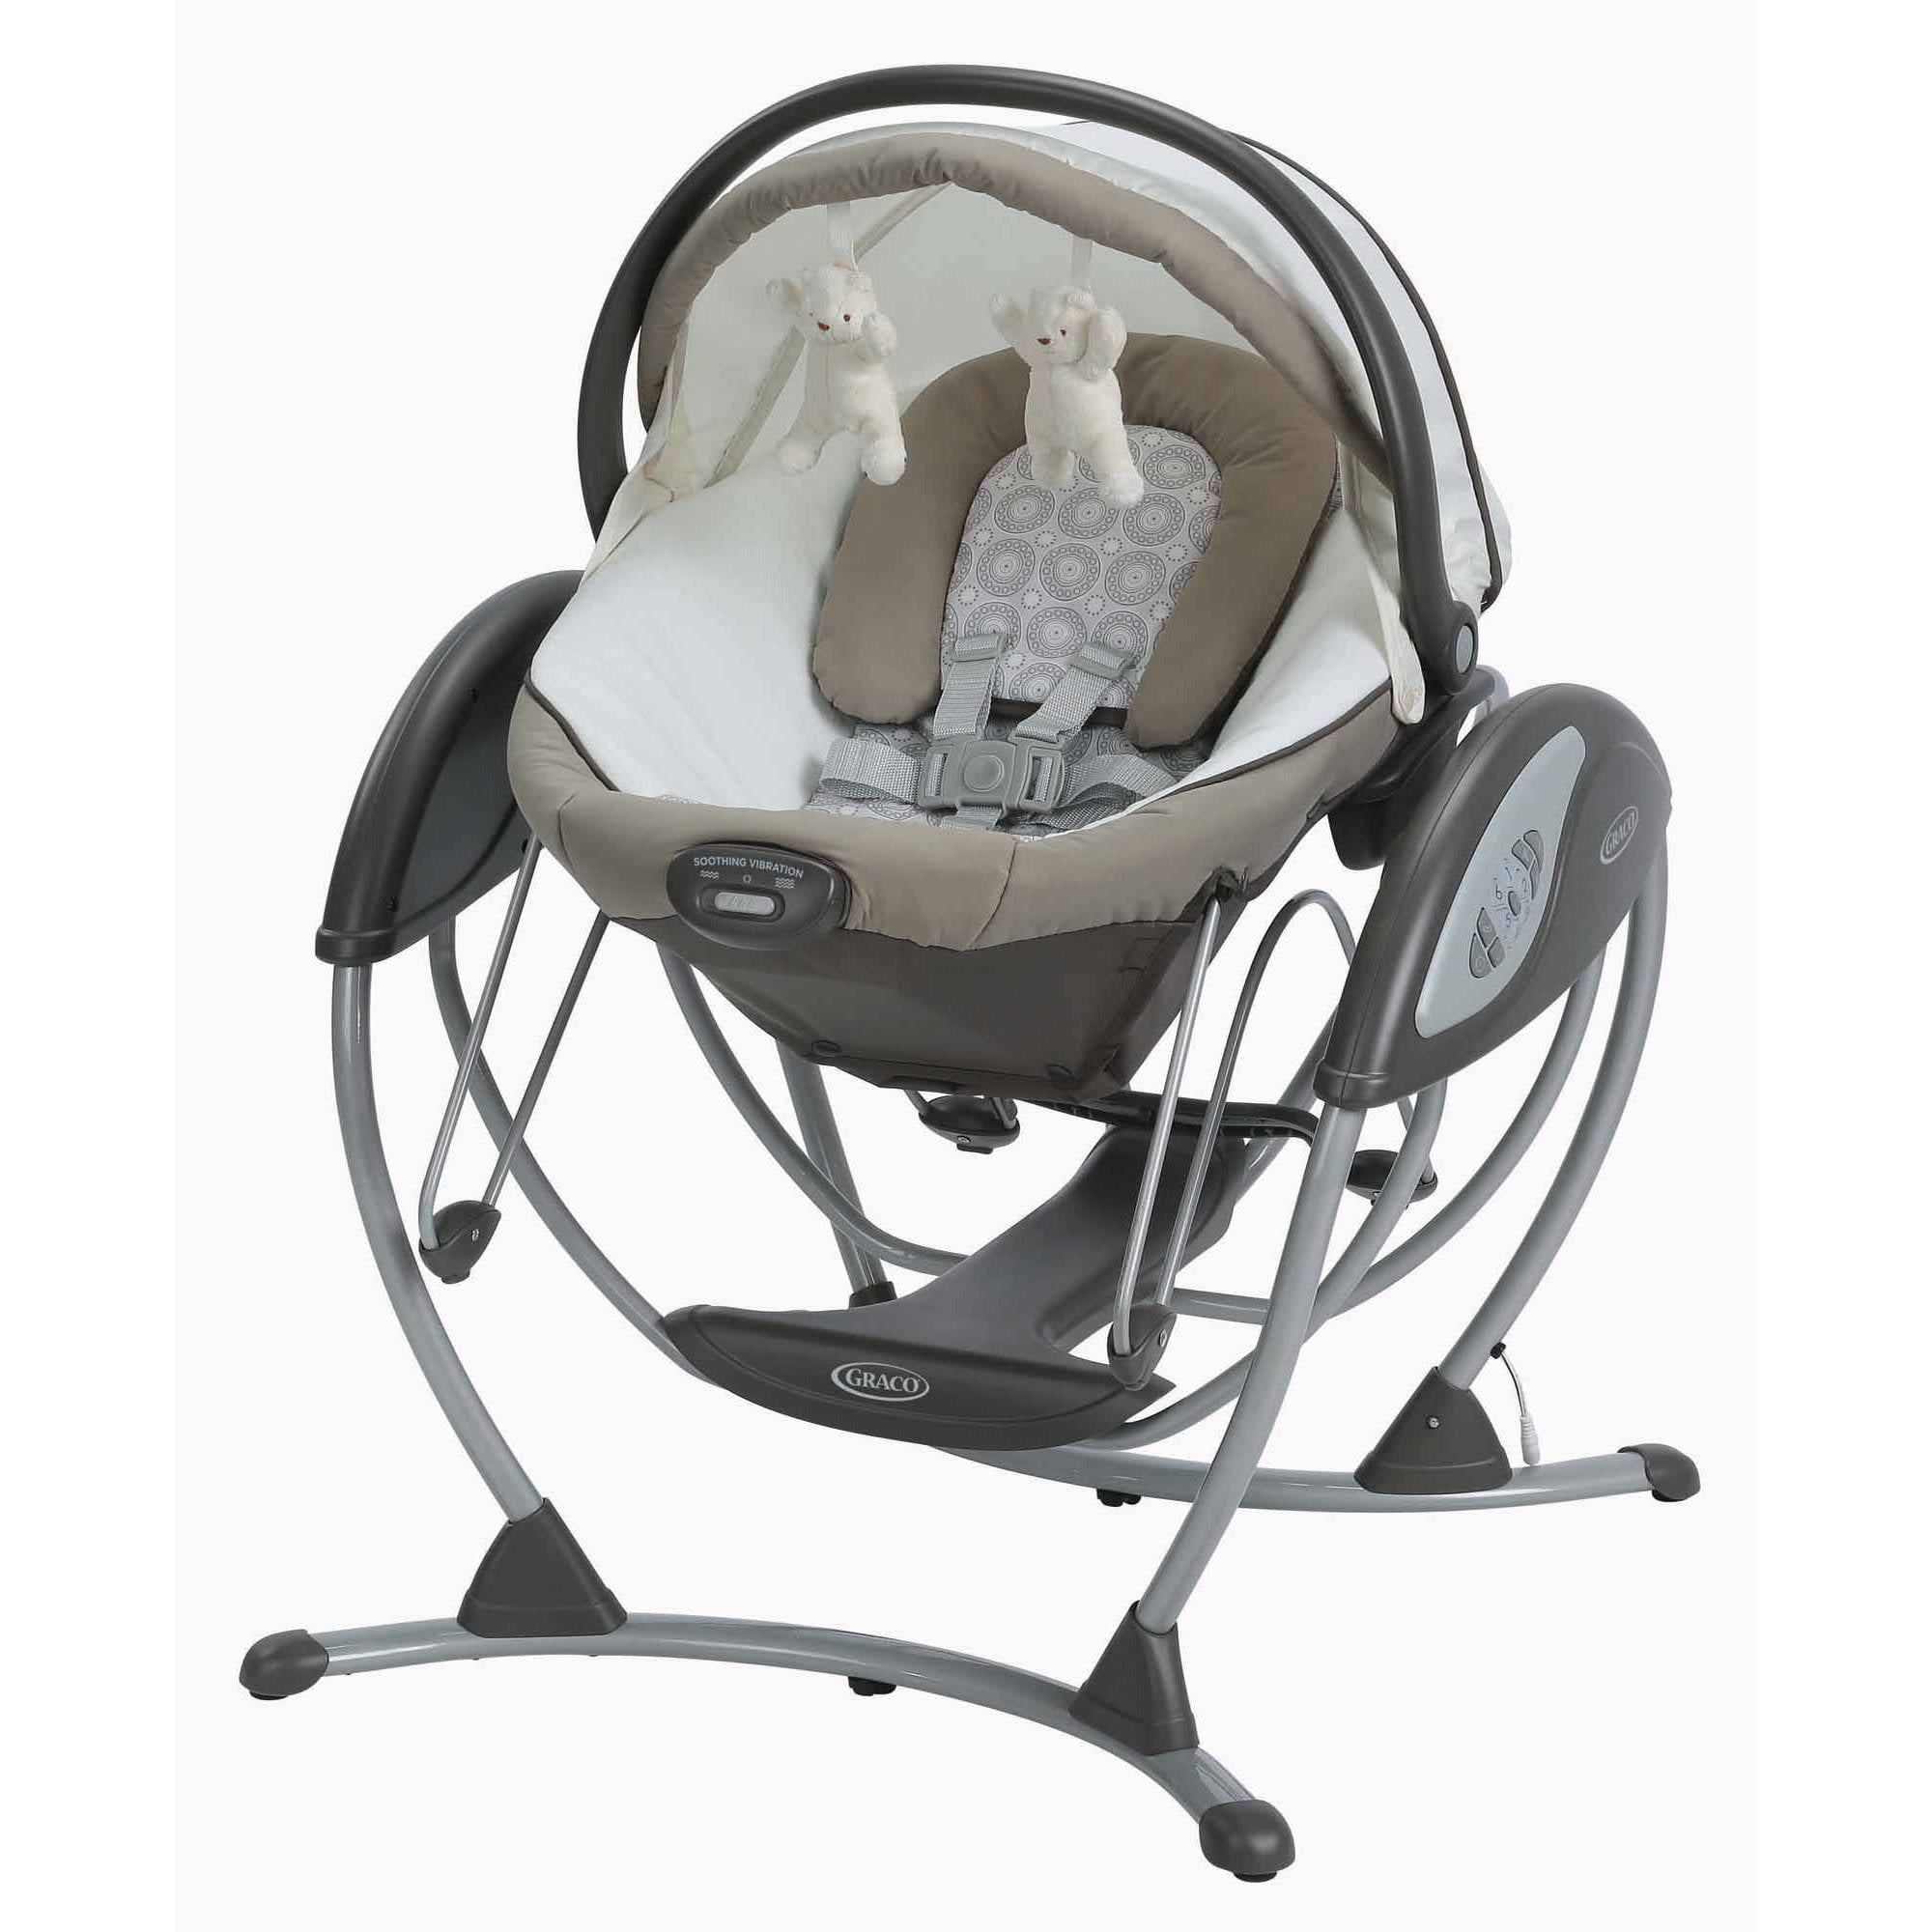 Photo 1 of Graco Soothing System Glider Baby Swing, Abbington